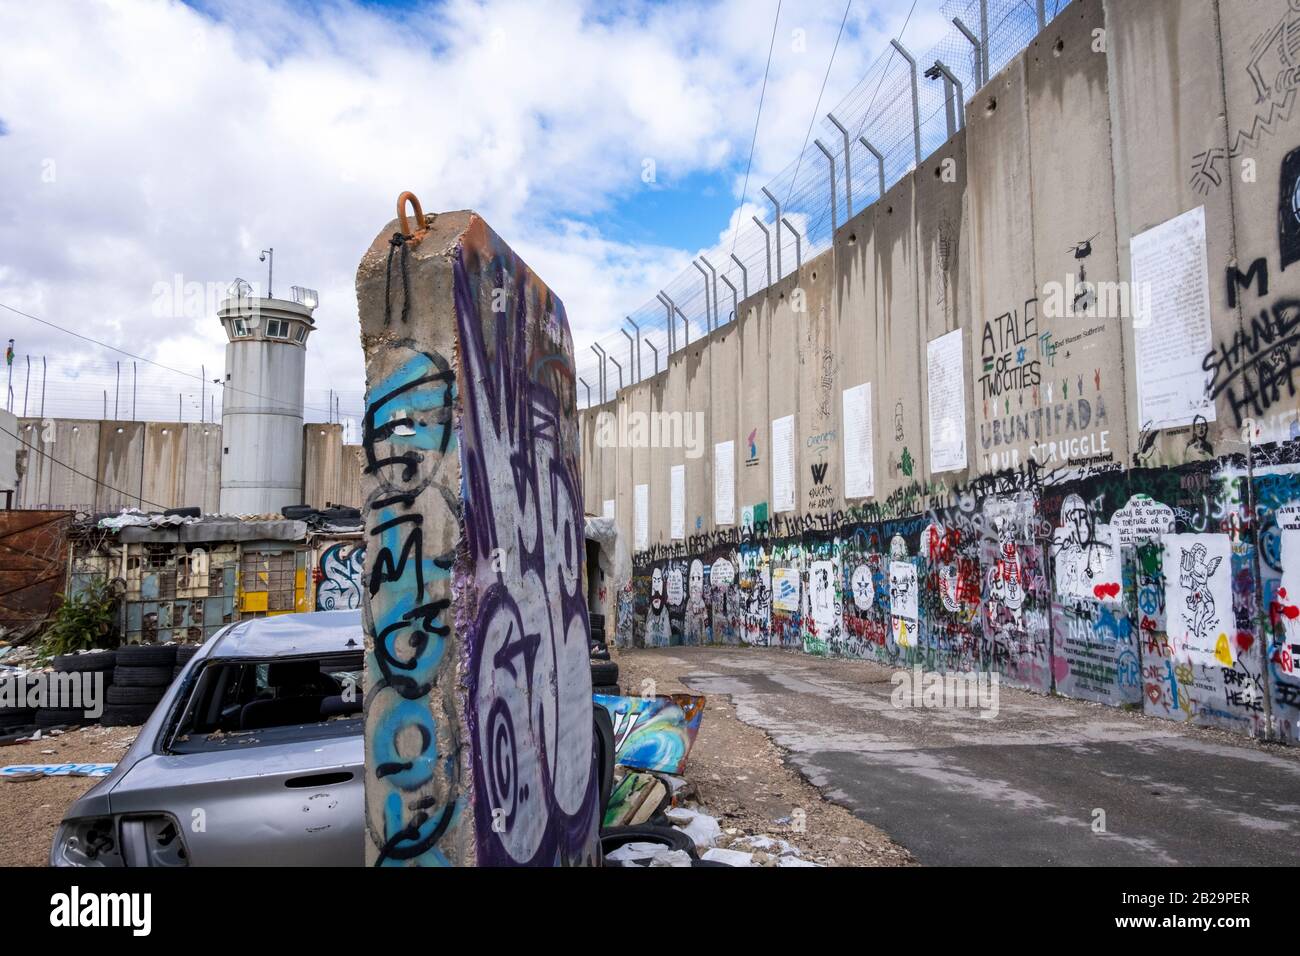 The separation wall in Bethlehem, Palestine Stock Photo